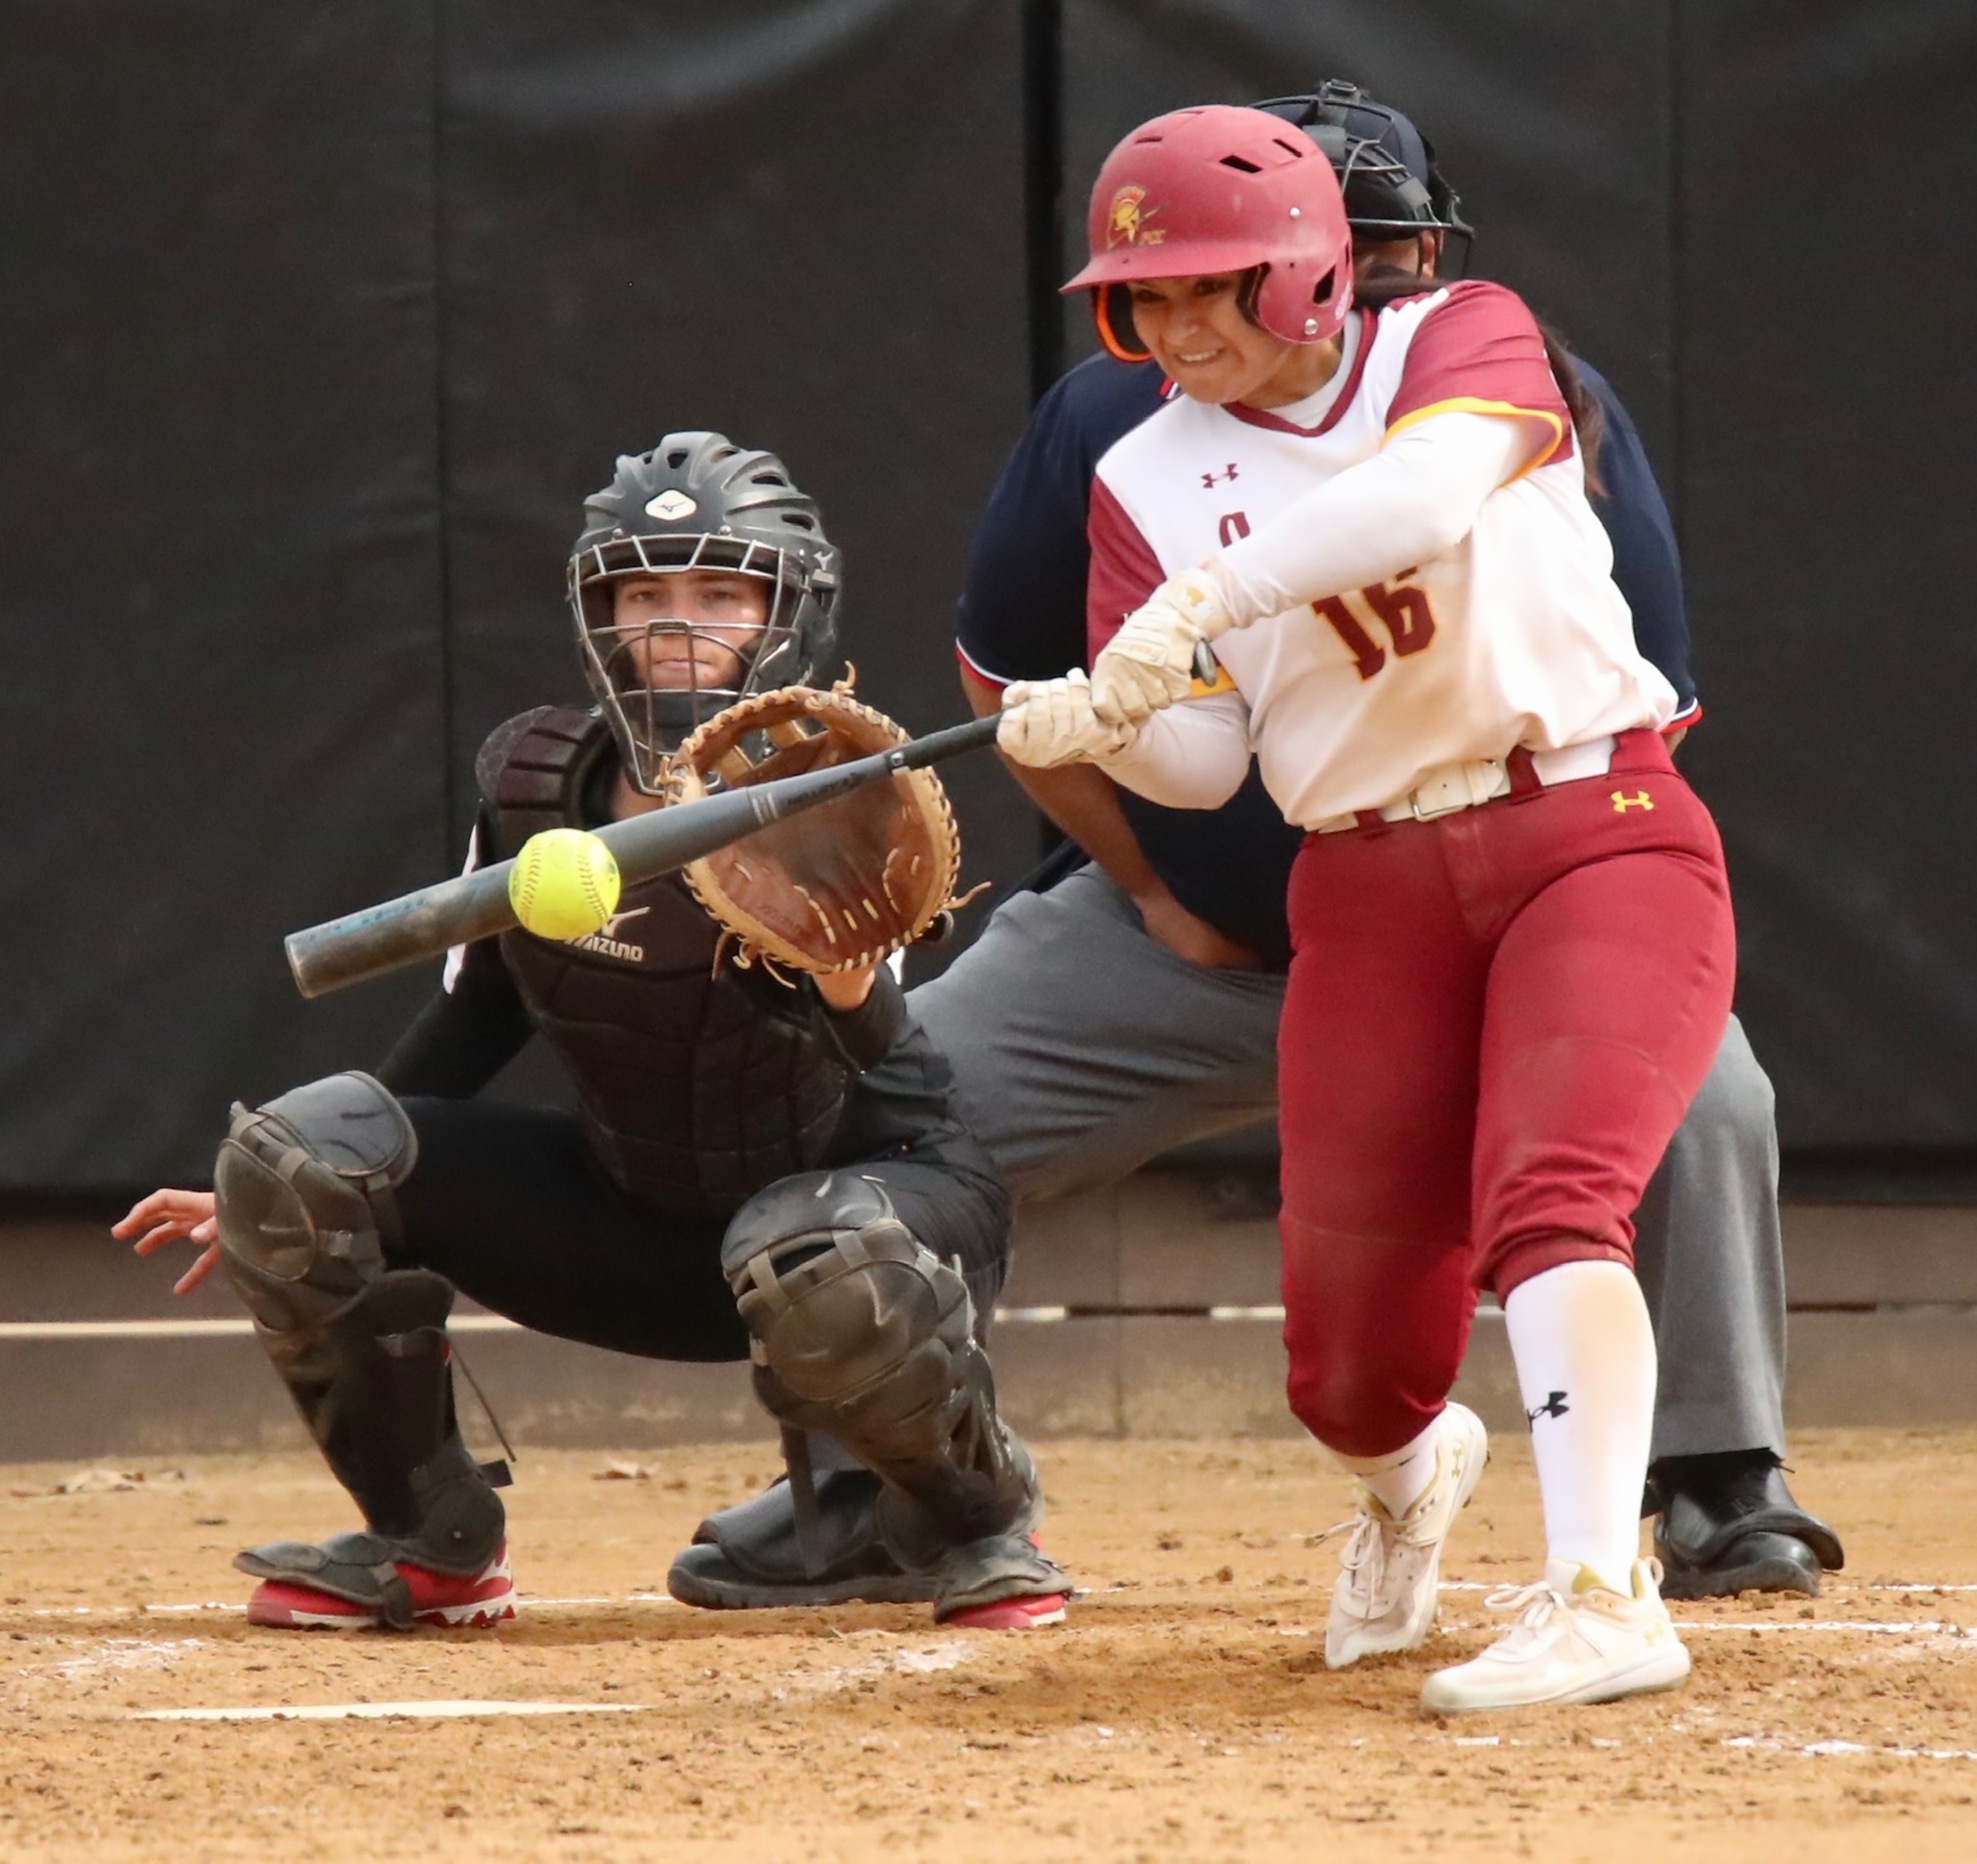 Priscilla Ortega had six hits in the Lancers doubleheader sweep on March 5 (file photo by Michael Watkins, Athletics).